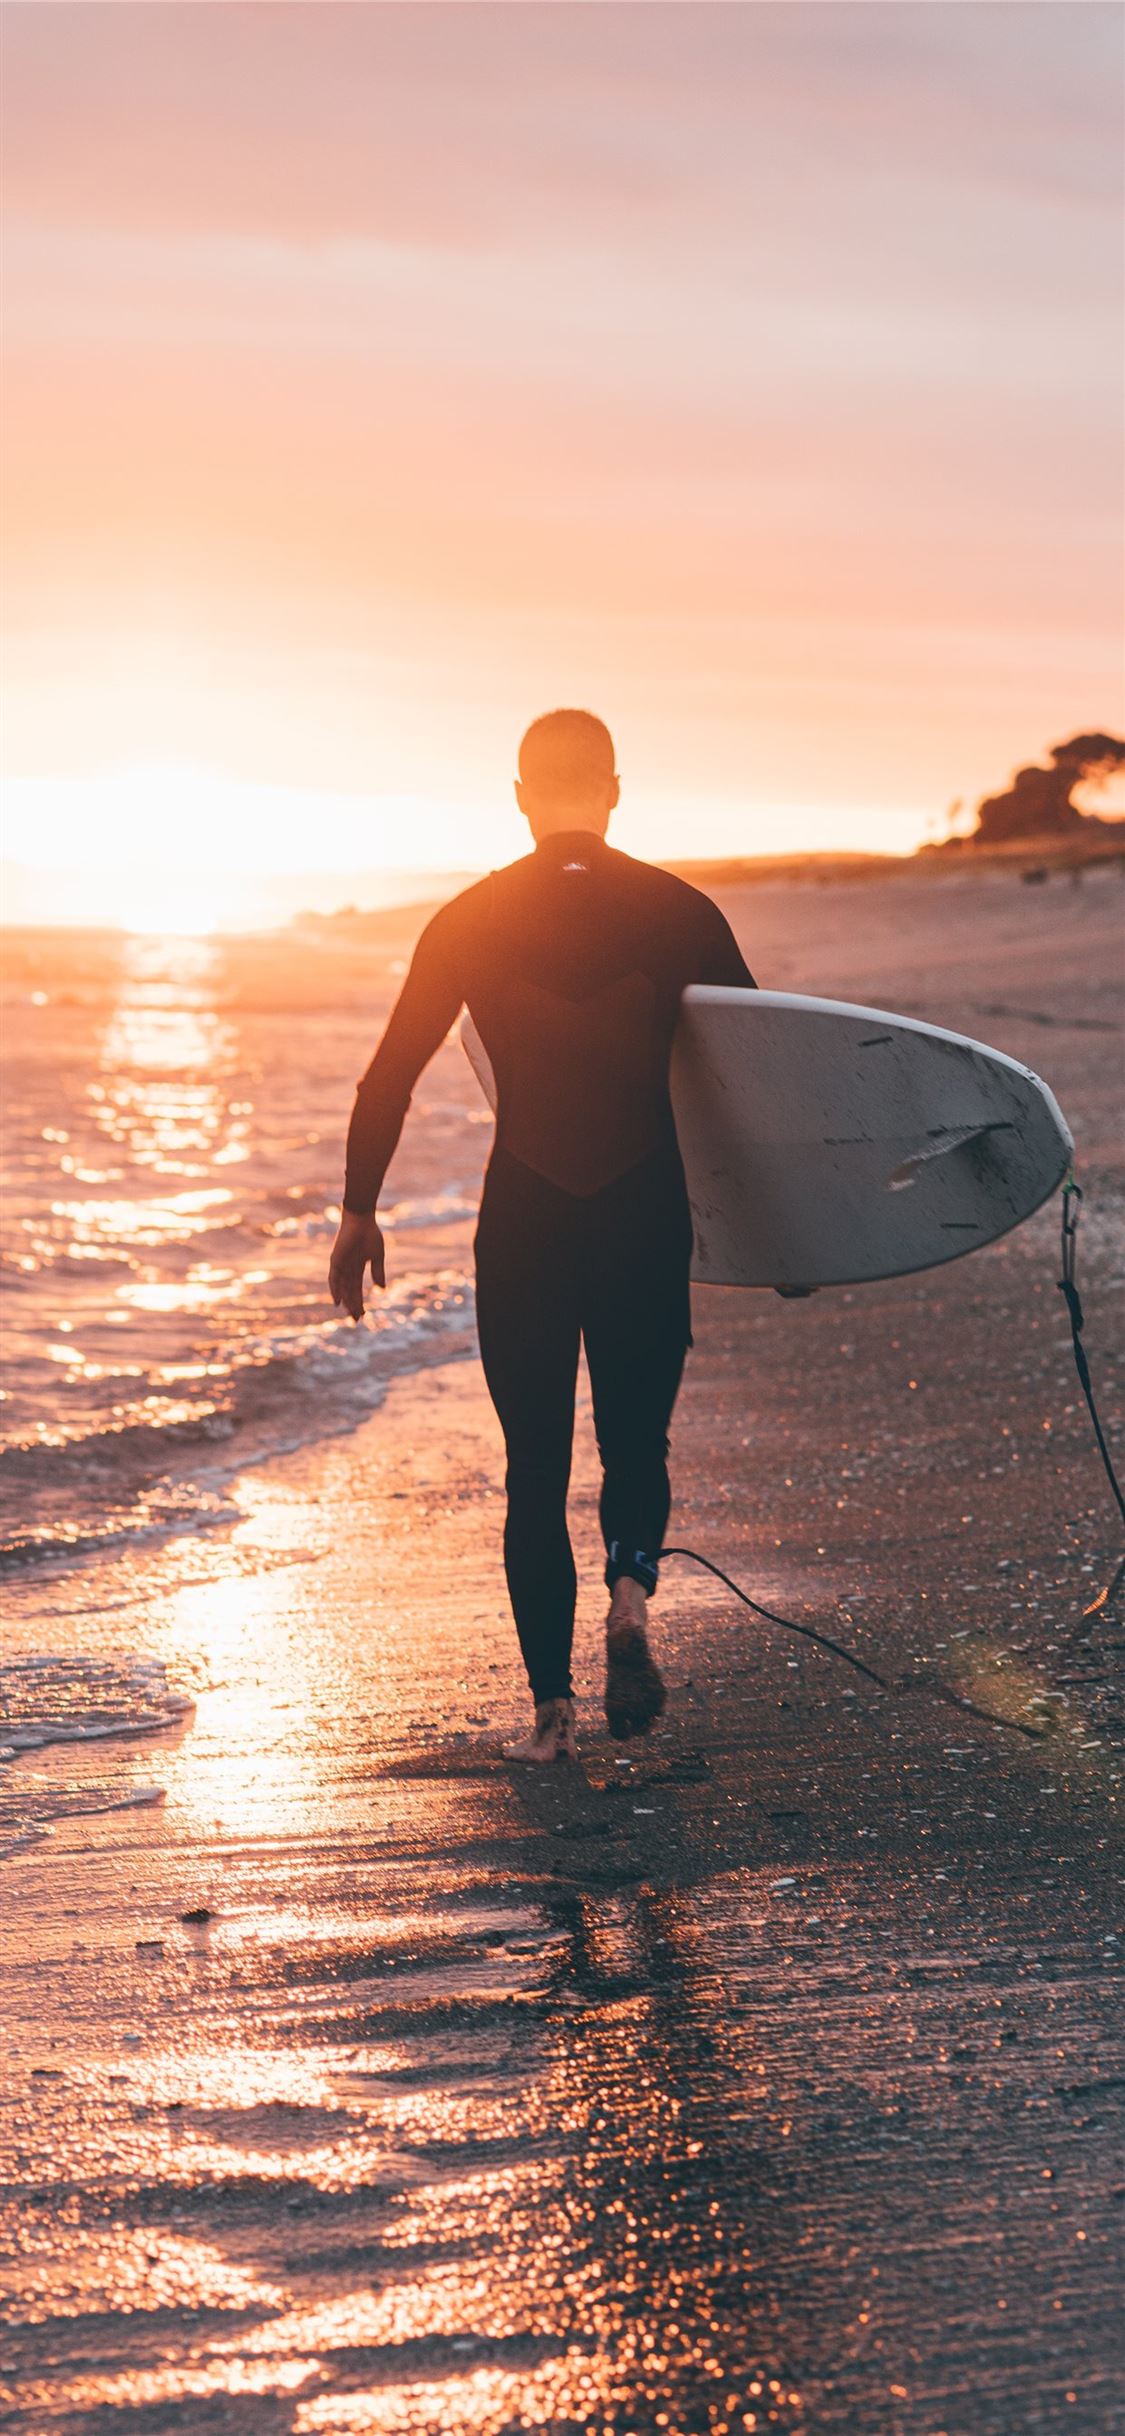 man holding white surfboard iPhone X Wallpaper Free Download